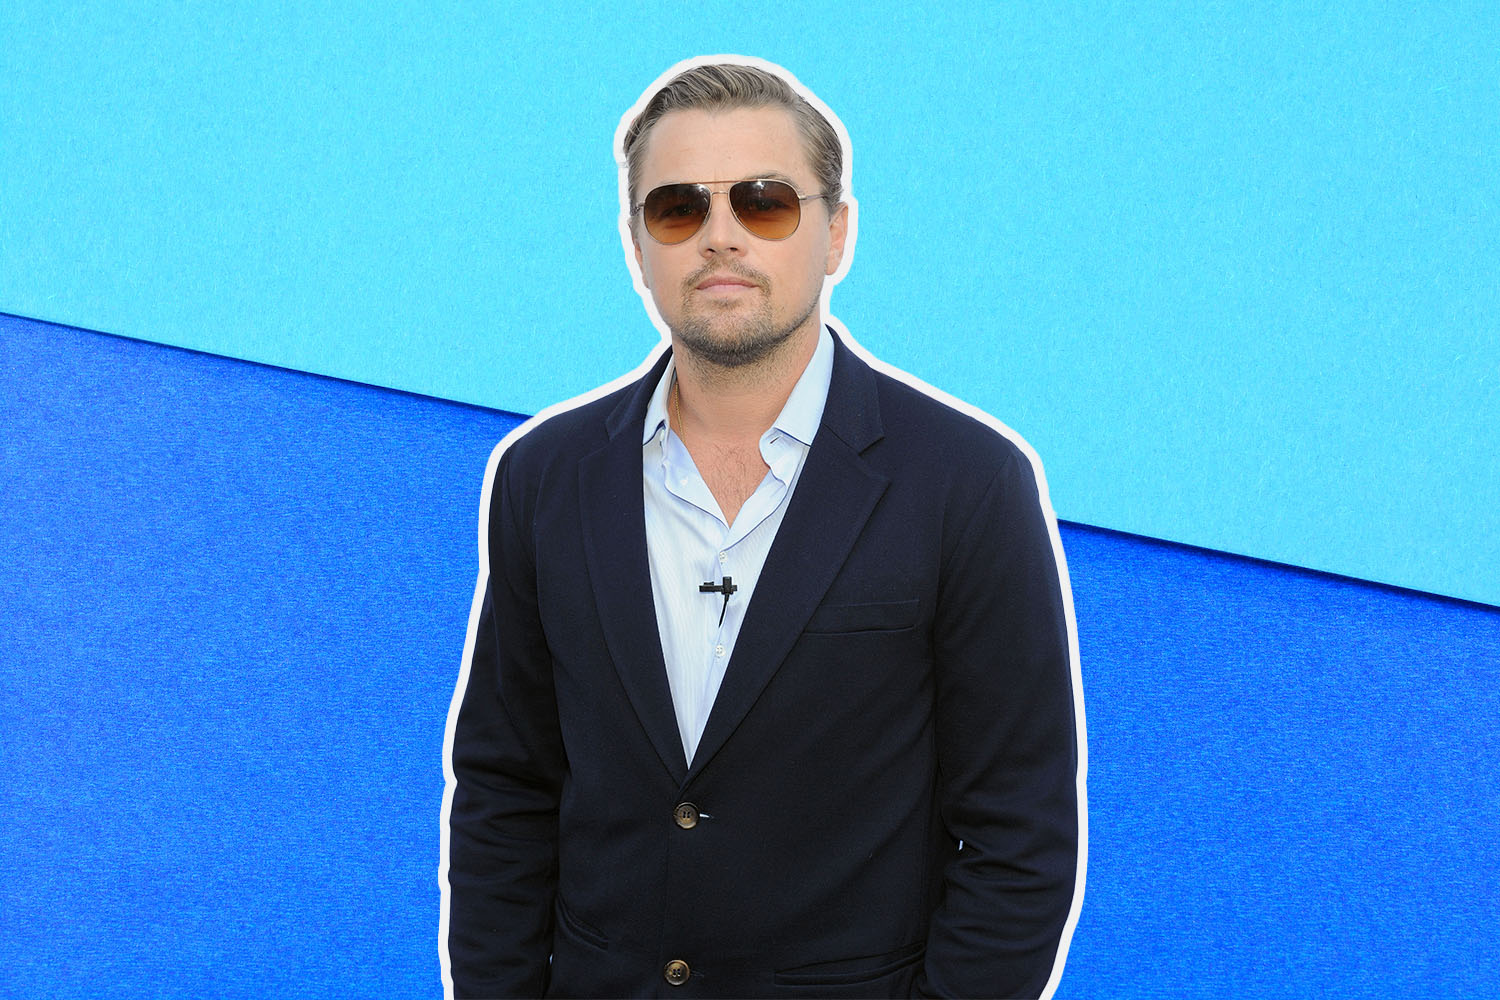 A photo of Leonardo DiCaprio wearing sunglasses against a two-toned blue background